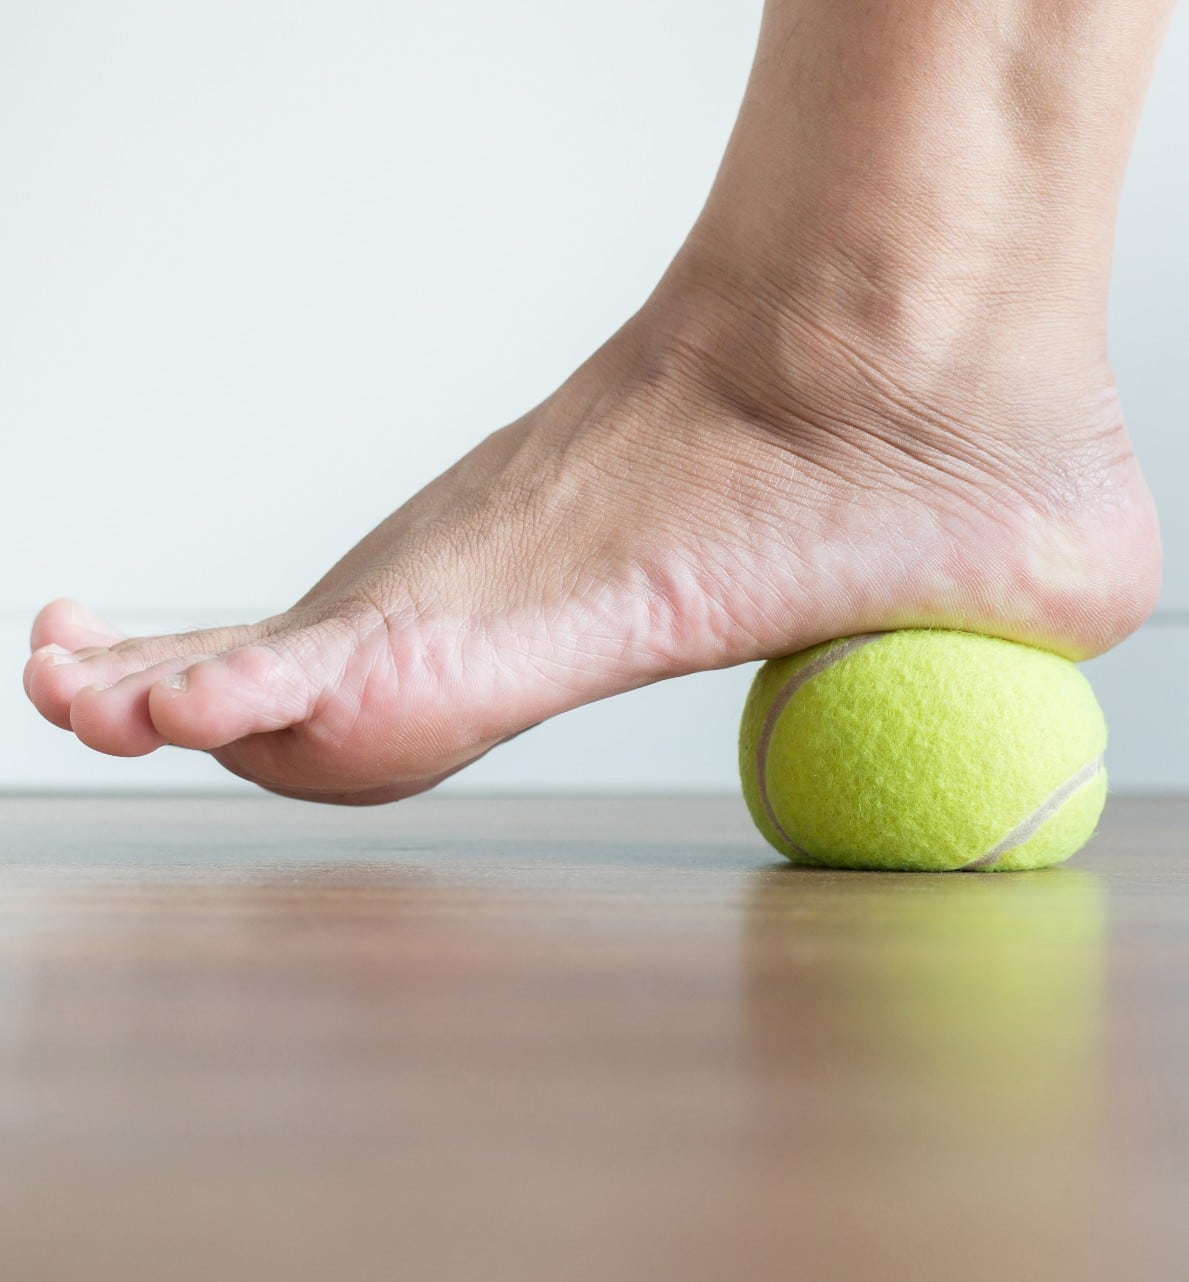 Rolling foot on tennis ball